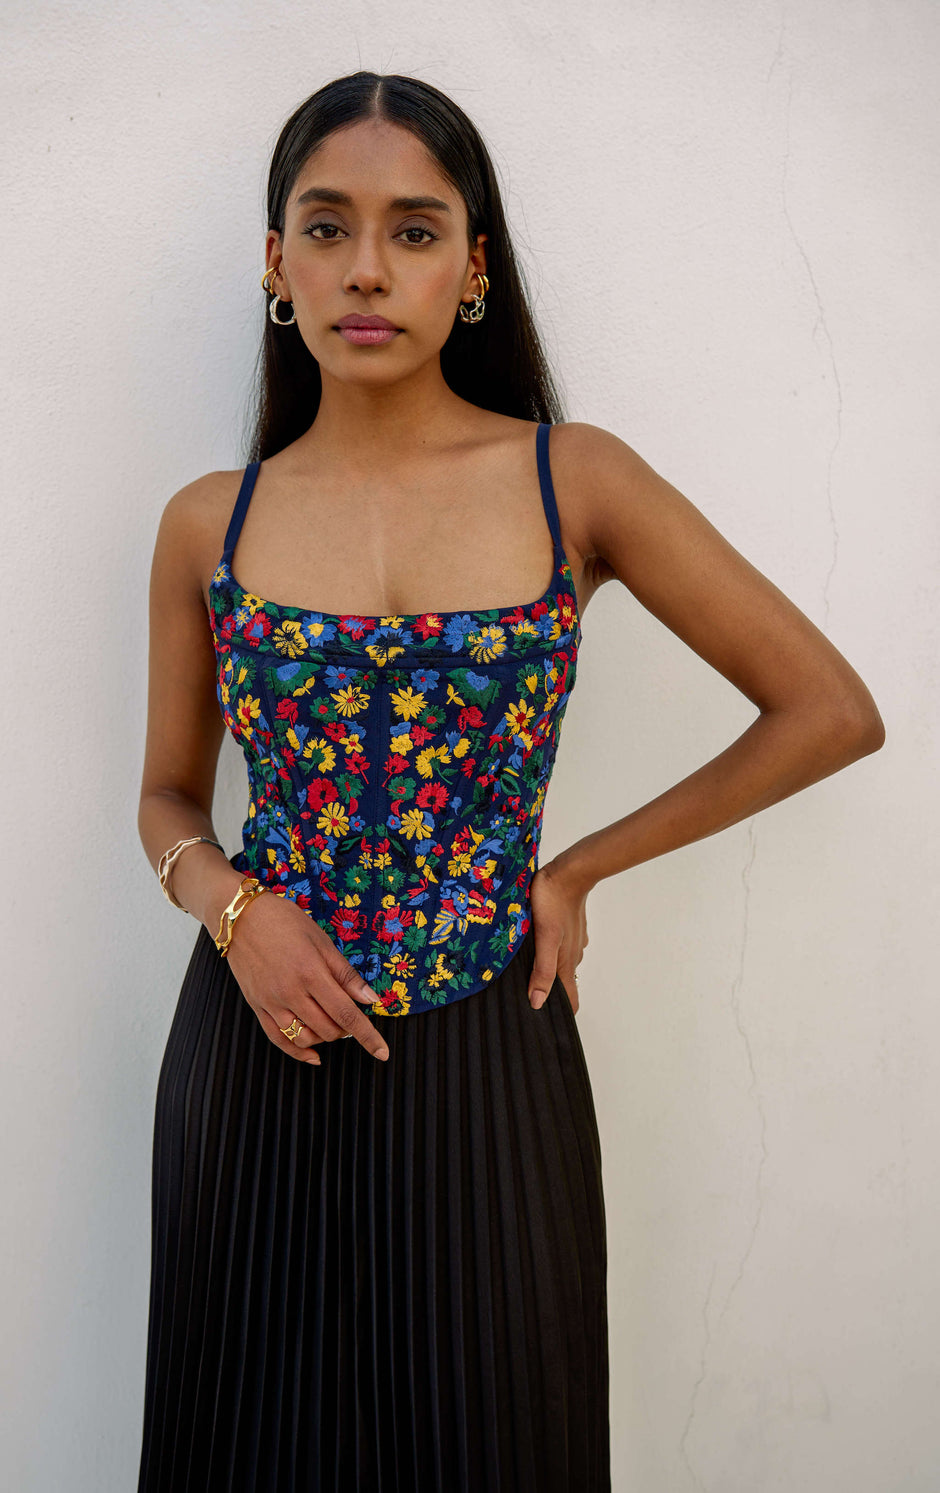 Sani: Indian & South Asian-Inspired Fashion. Shop now.